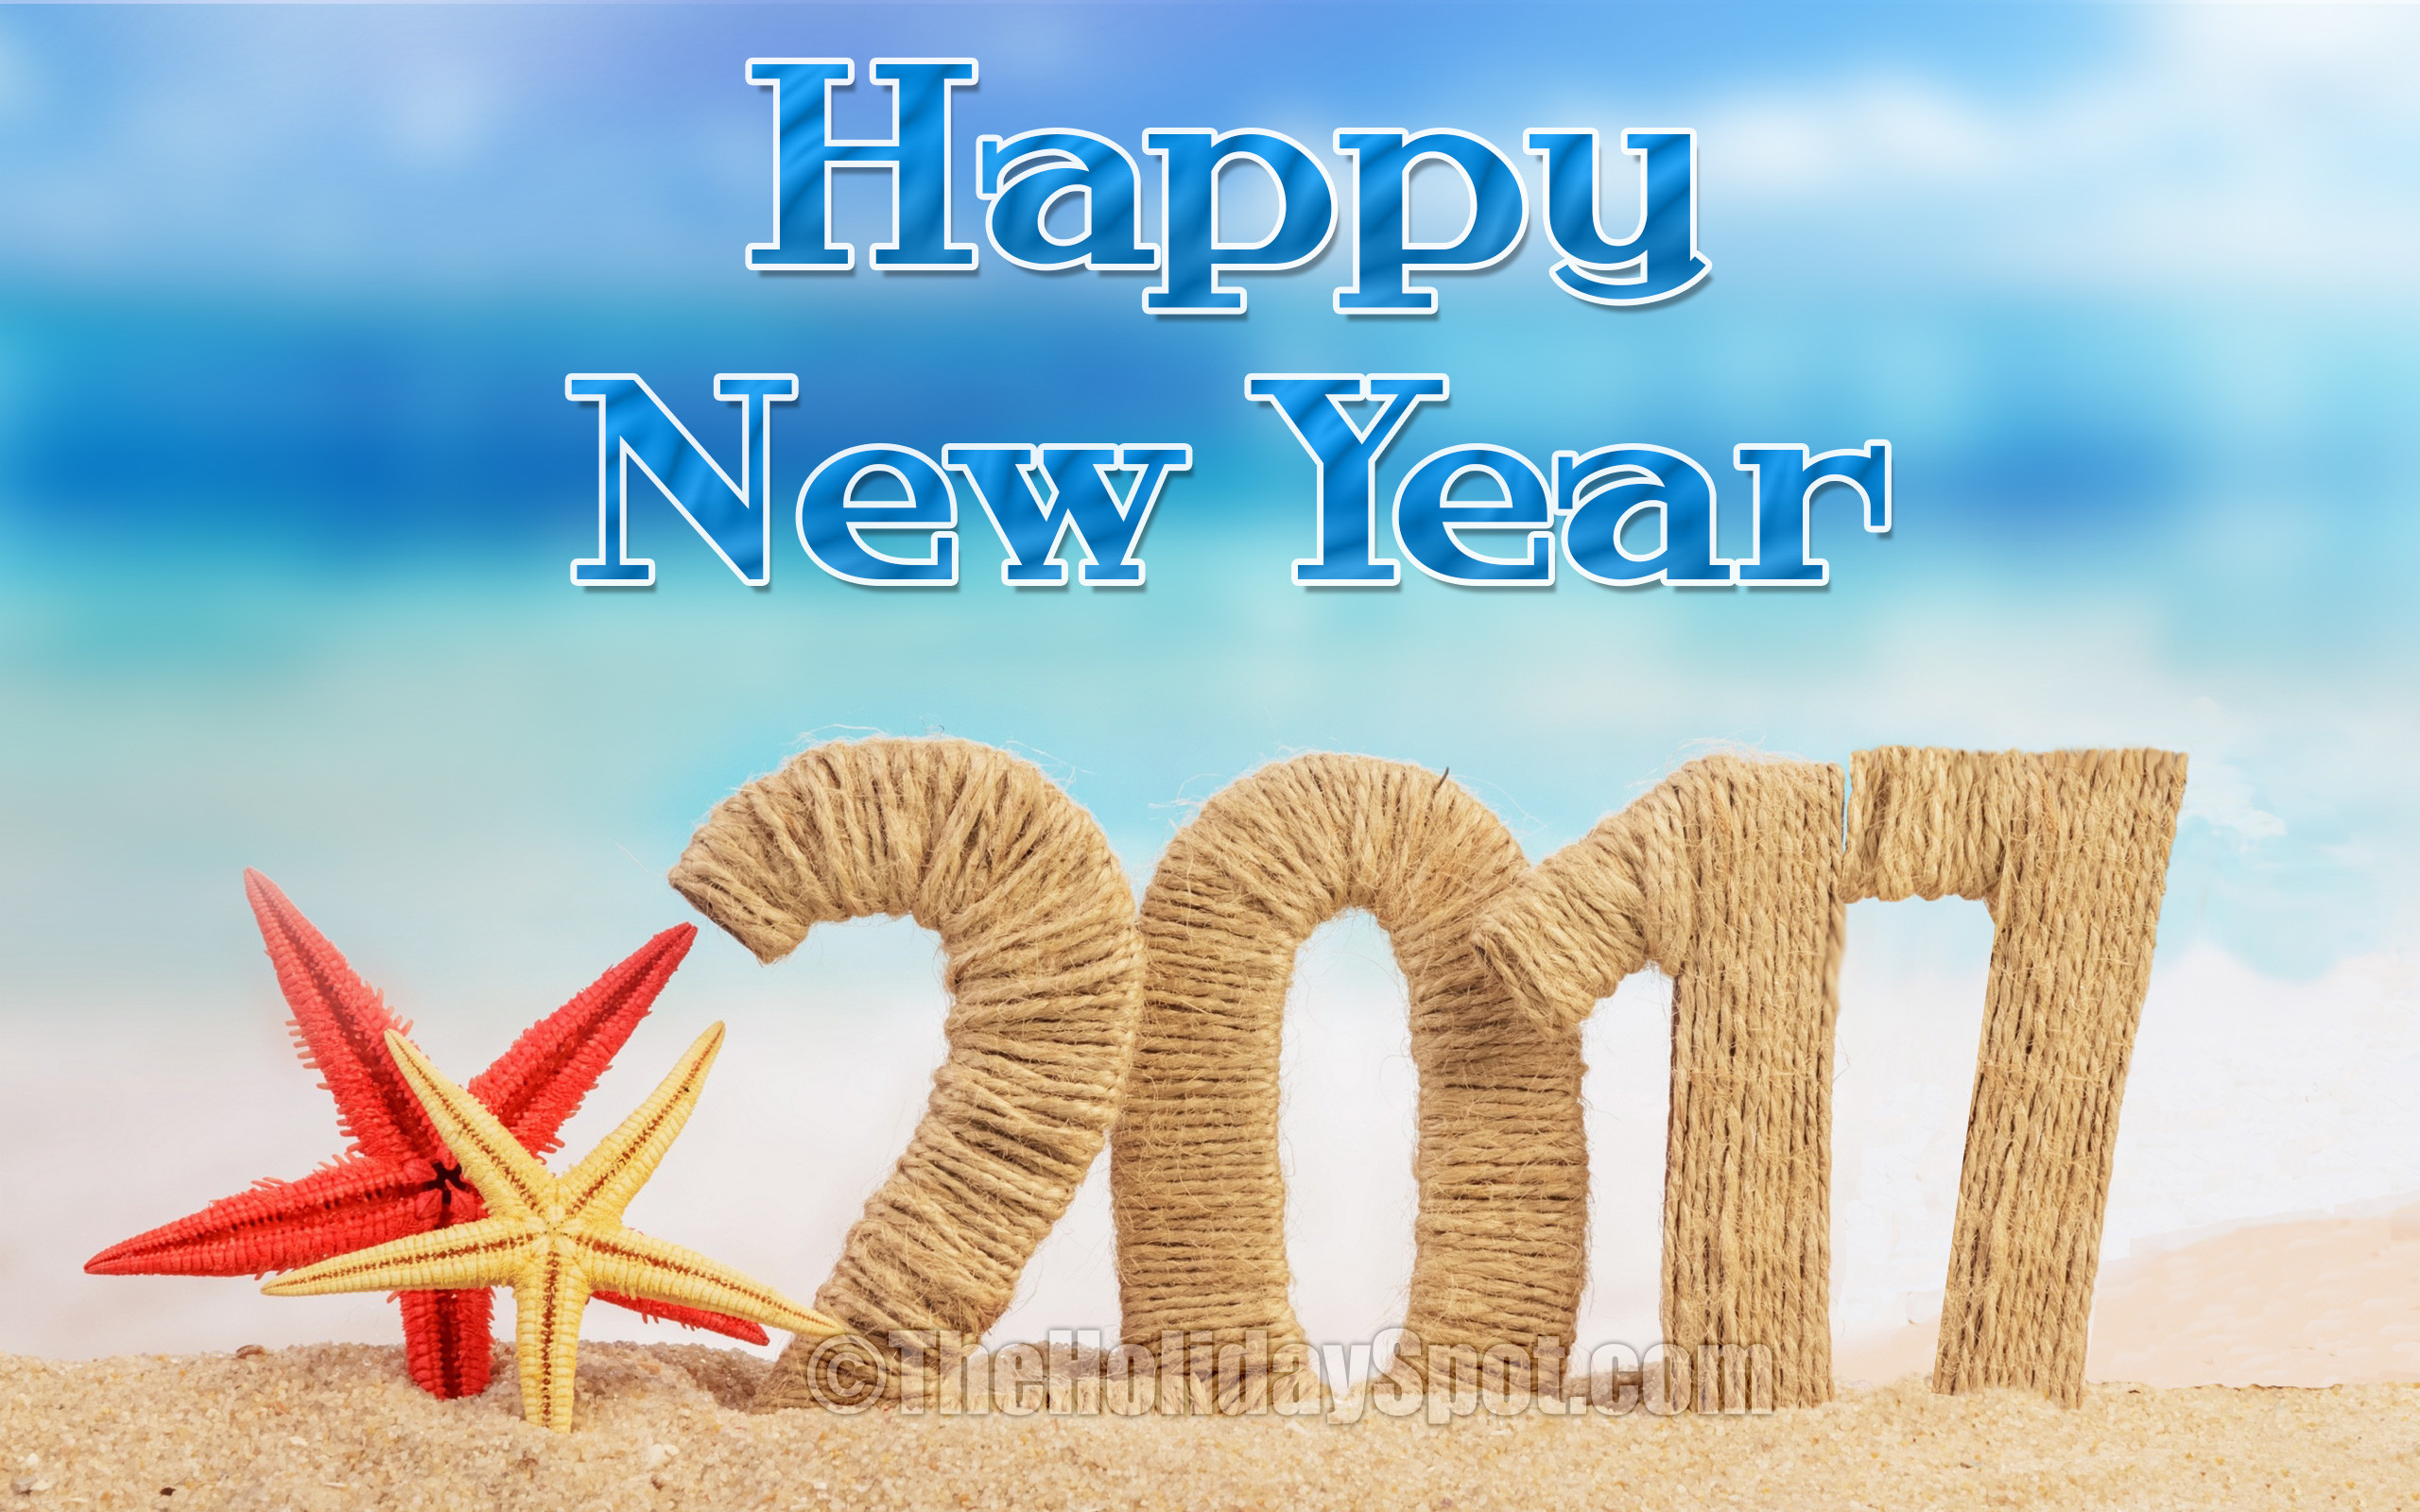 New Year Wallpaper – Happy New Year with rope